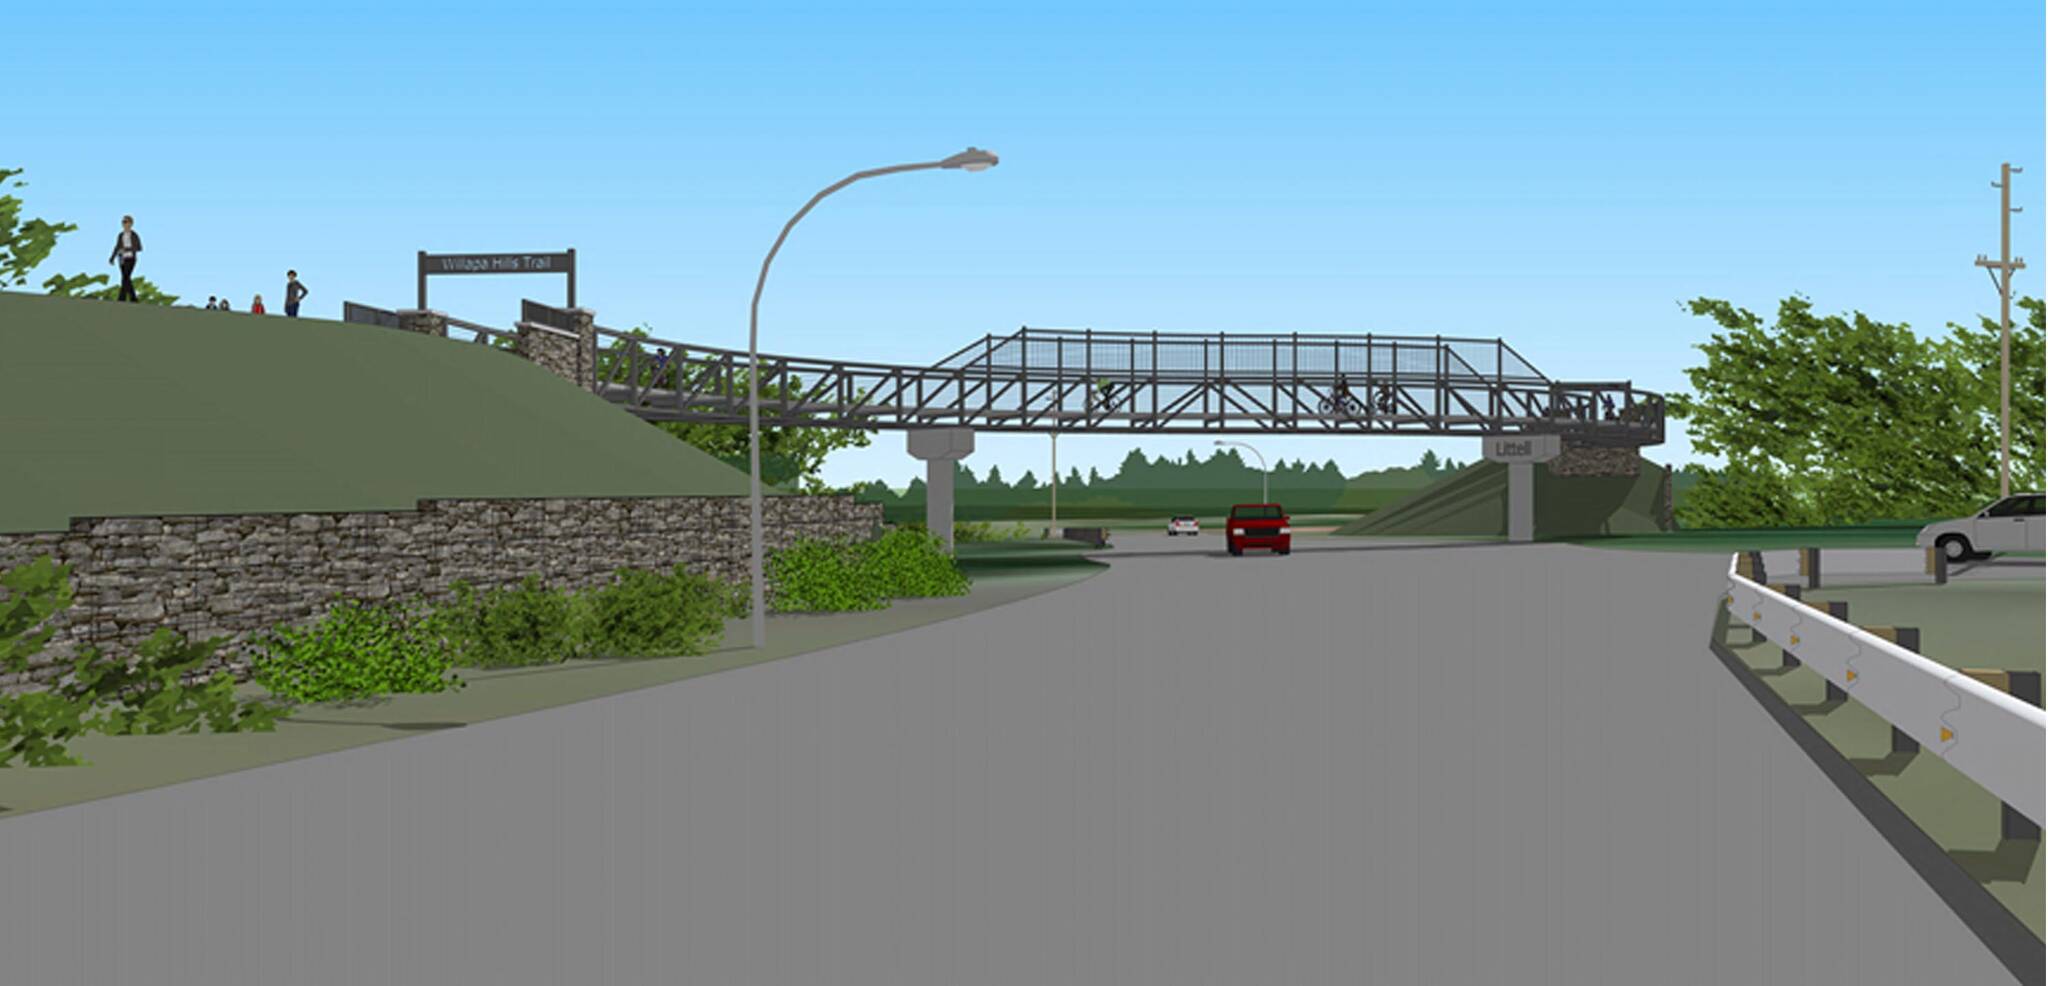 Here’s what the bridge on the Willapa Hills Trail will look like when construction, which began Sept. 20 after a months-long, COVID-related delay, is complete next year. (Courtesy Washington State Parks)